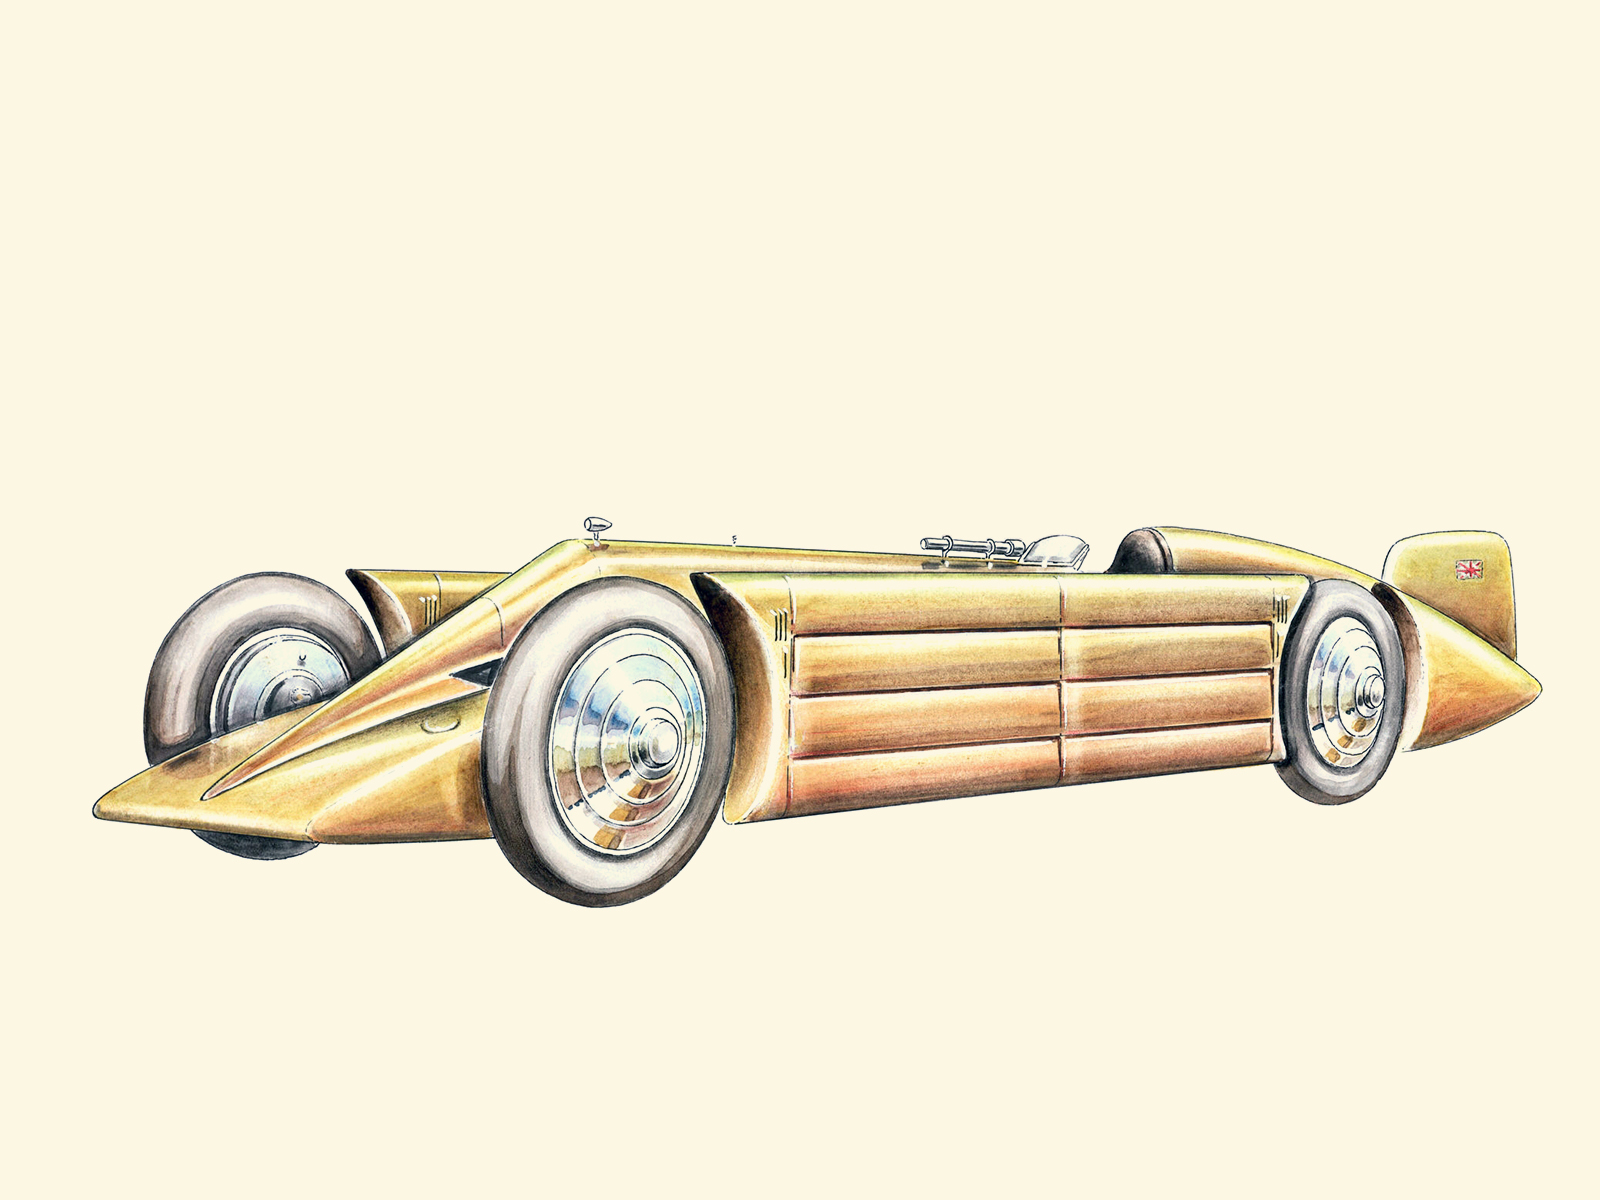 1929 Irving Special 'Golden Arrow' (H. Segrave 231.44 mph): Illustrated by Piet Olyslager